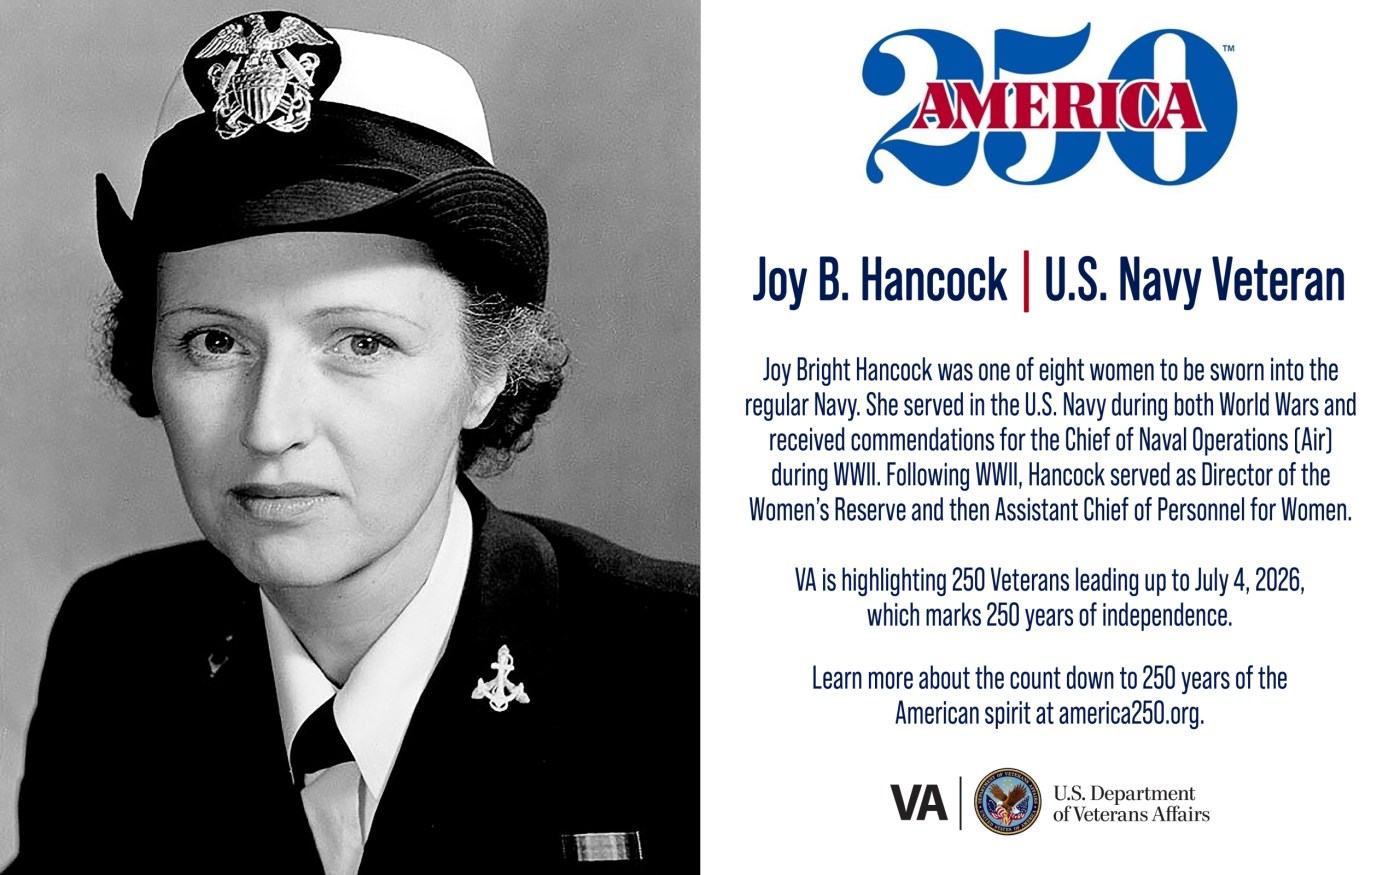 This week’s America250 salute is Navy Veteran Joy Bright Hancock, who served in both World Wars and was director of the Women Accepted for Volunteer Emergency Service (WAVES).